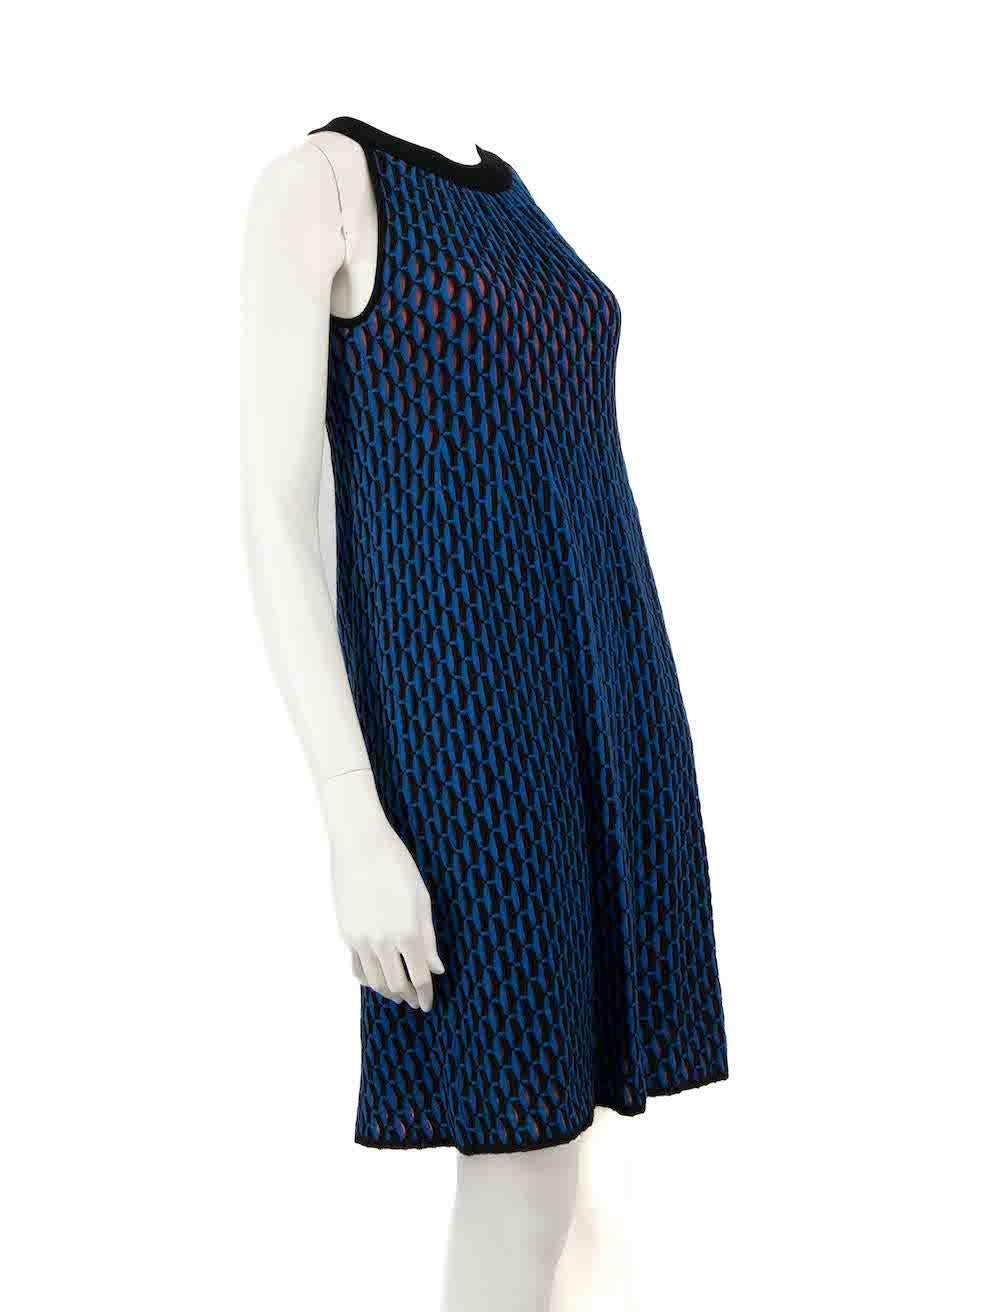 CONDITION is Very good. Hardly any visible wear to dress is evident. However, the composition label has been cut off on this used M Missoni designer resale item.
 
 
 
 Details
 
 
 Blue
 
 Wool
 
 Knit dress
 
 Abstract pattern
 
 Mini
 
